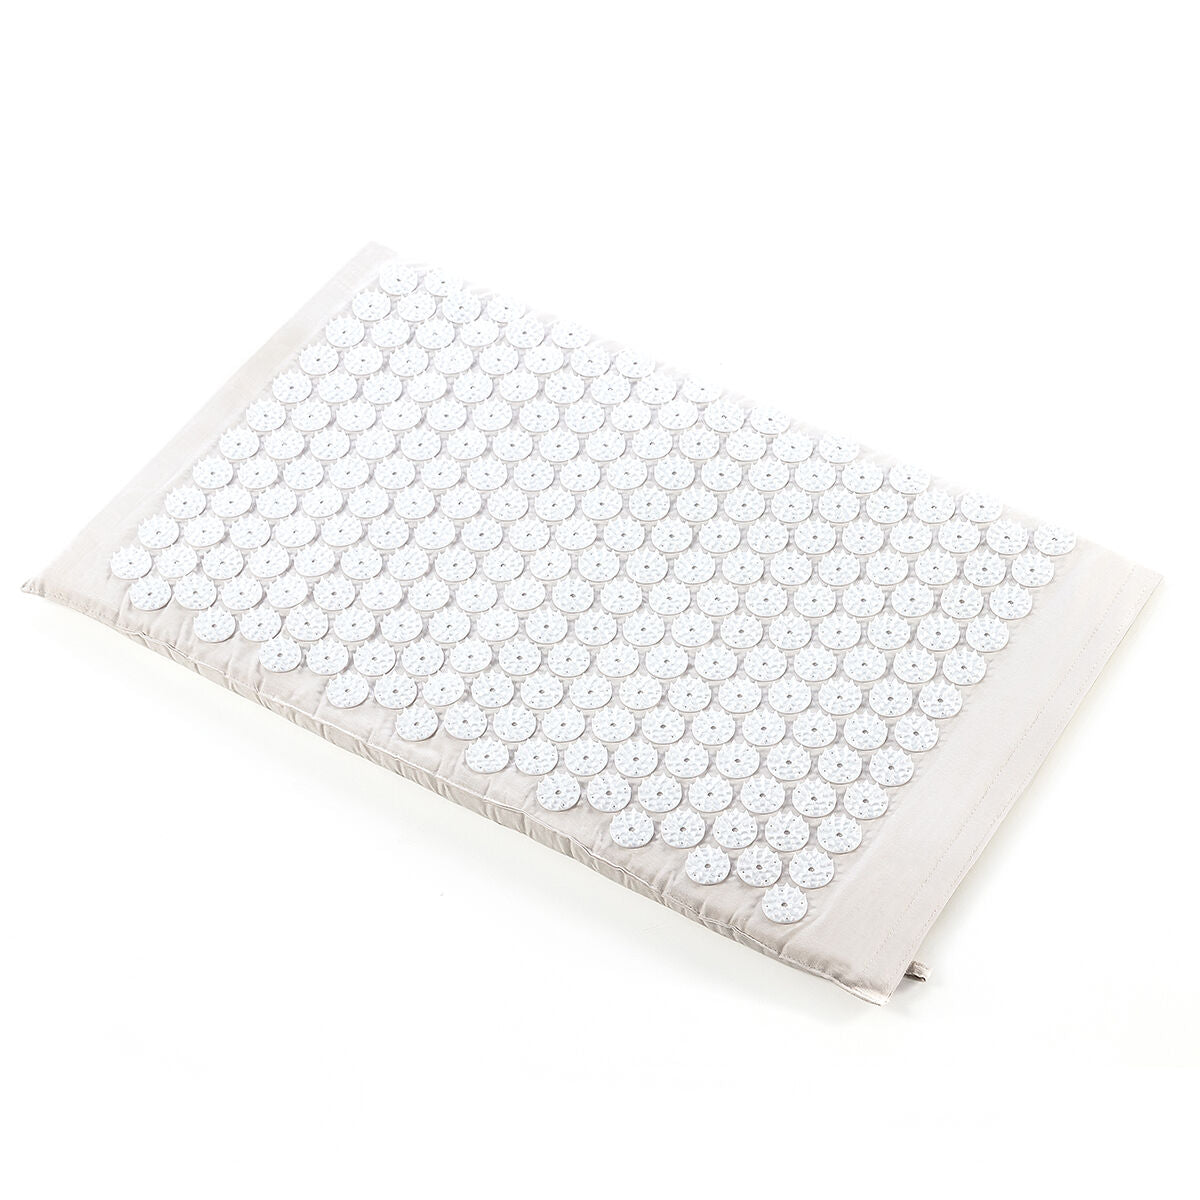 Padded Pressure Point Mat Apoinch InnovaGoods - Calm Beauty IE